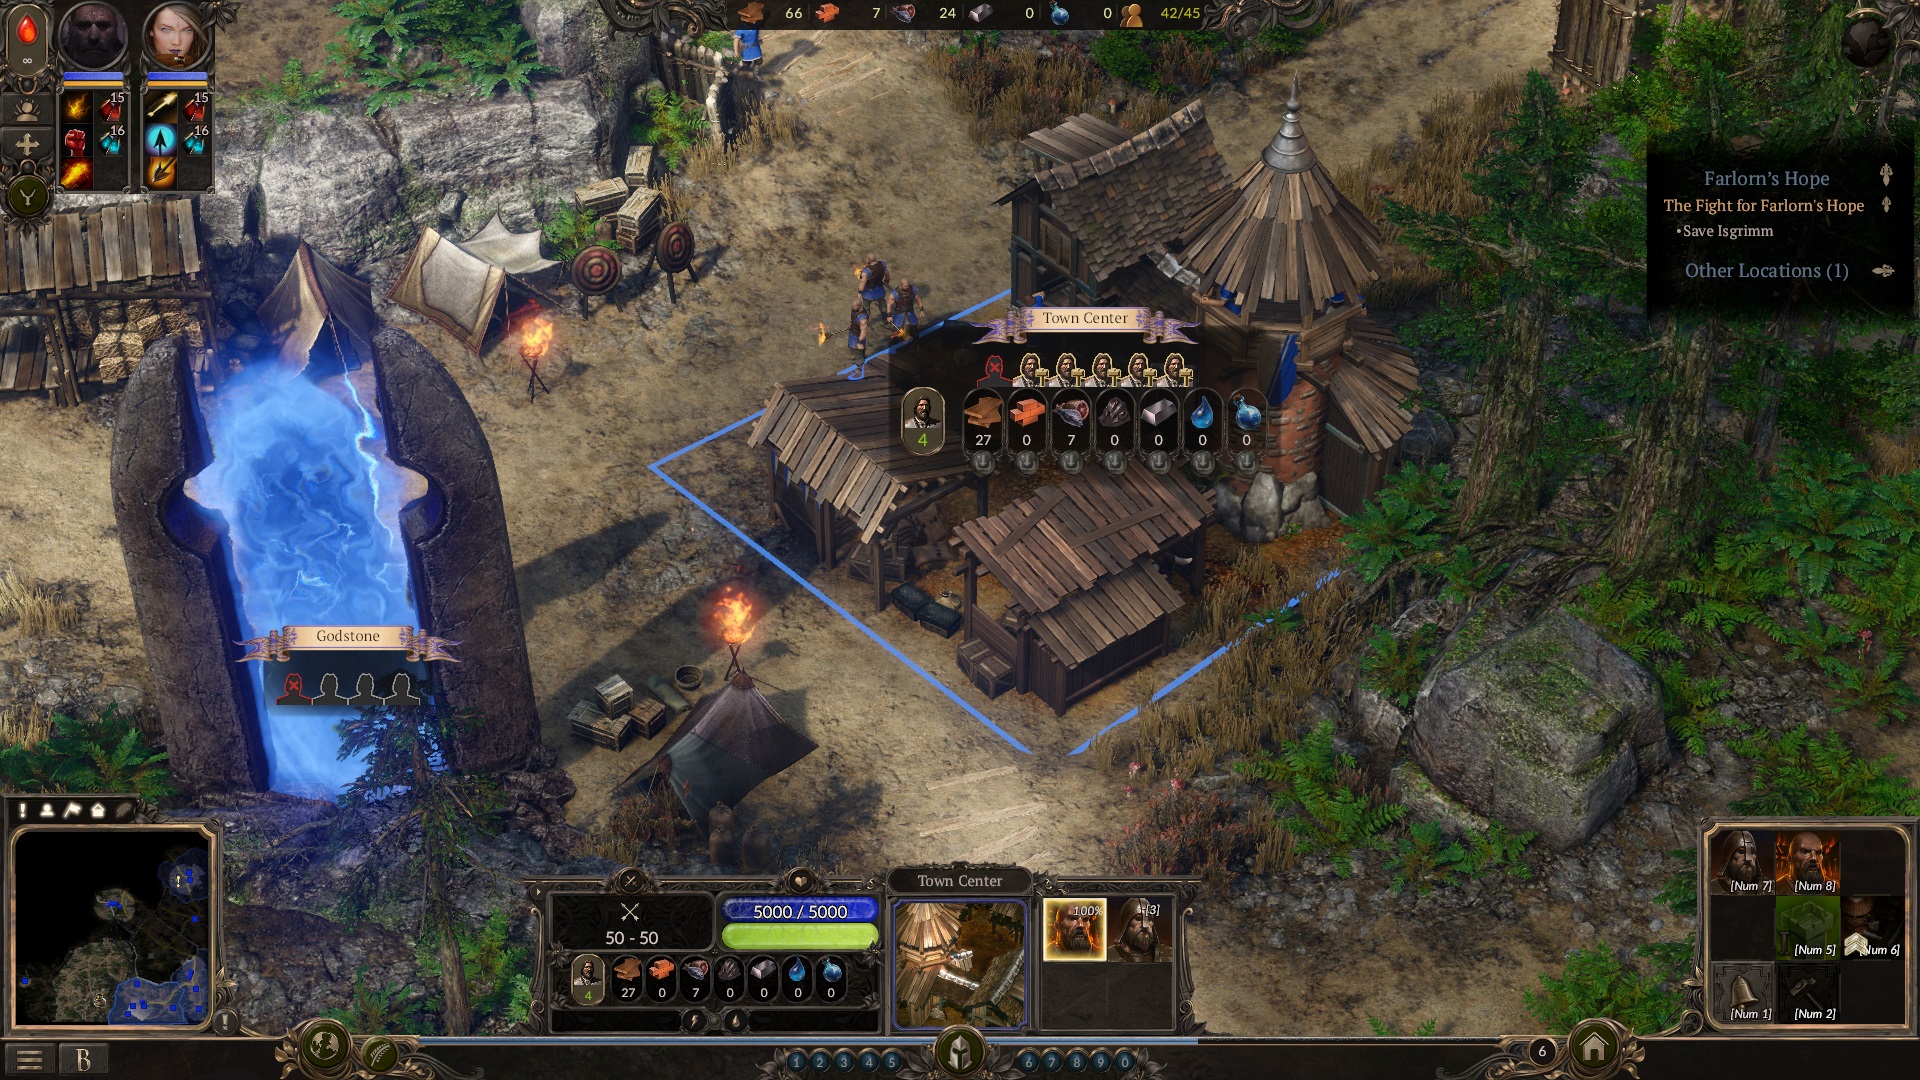 spellforce 3 review